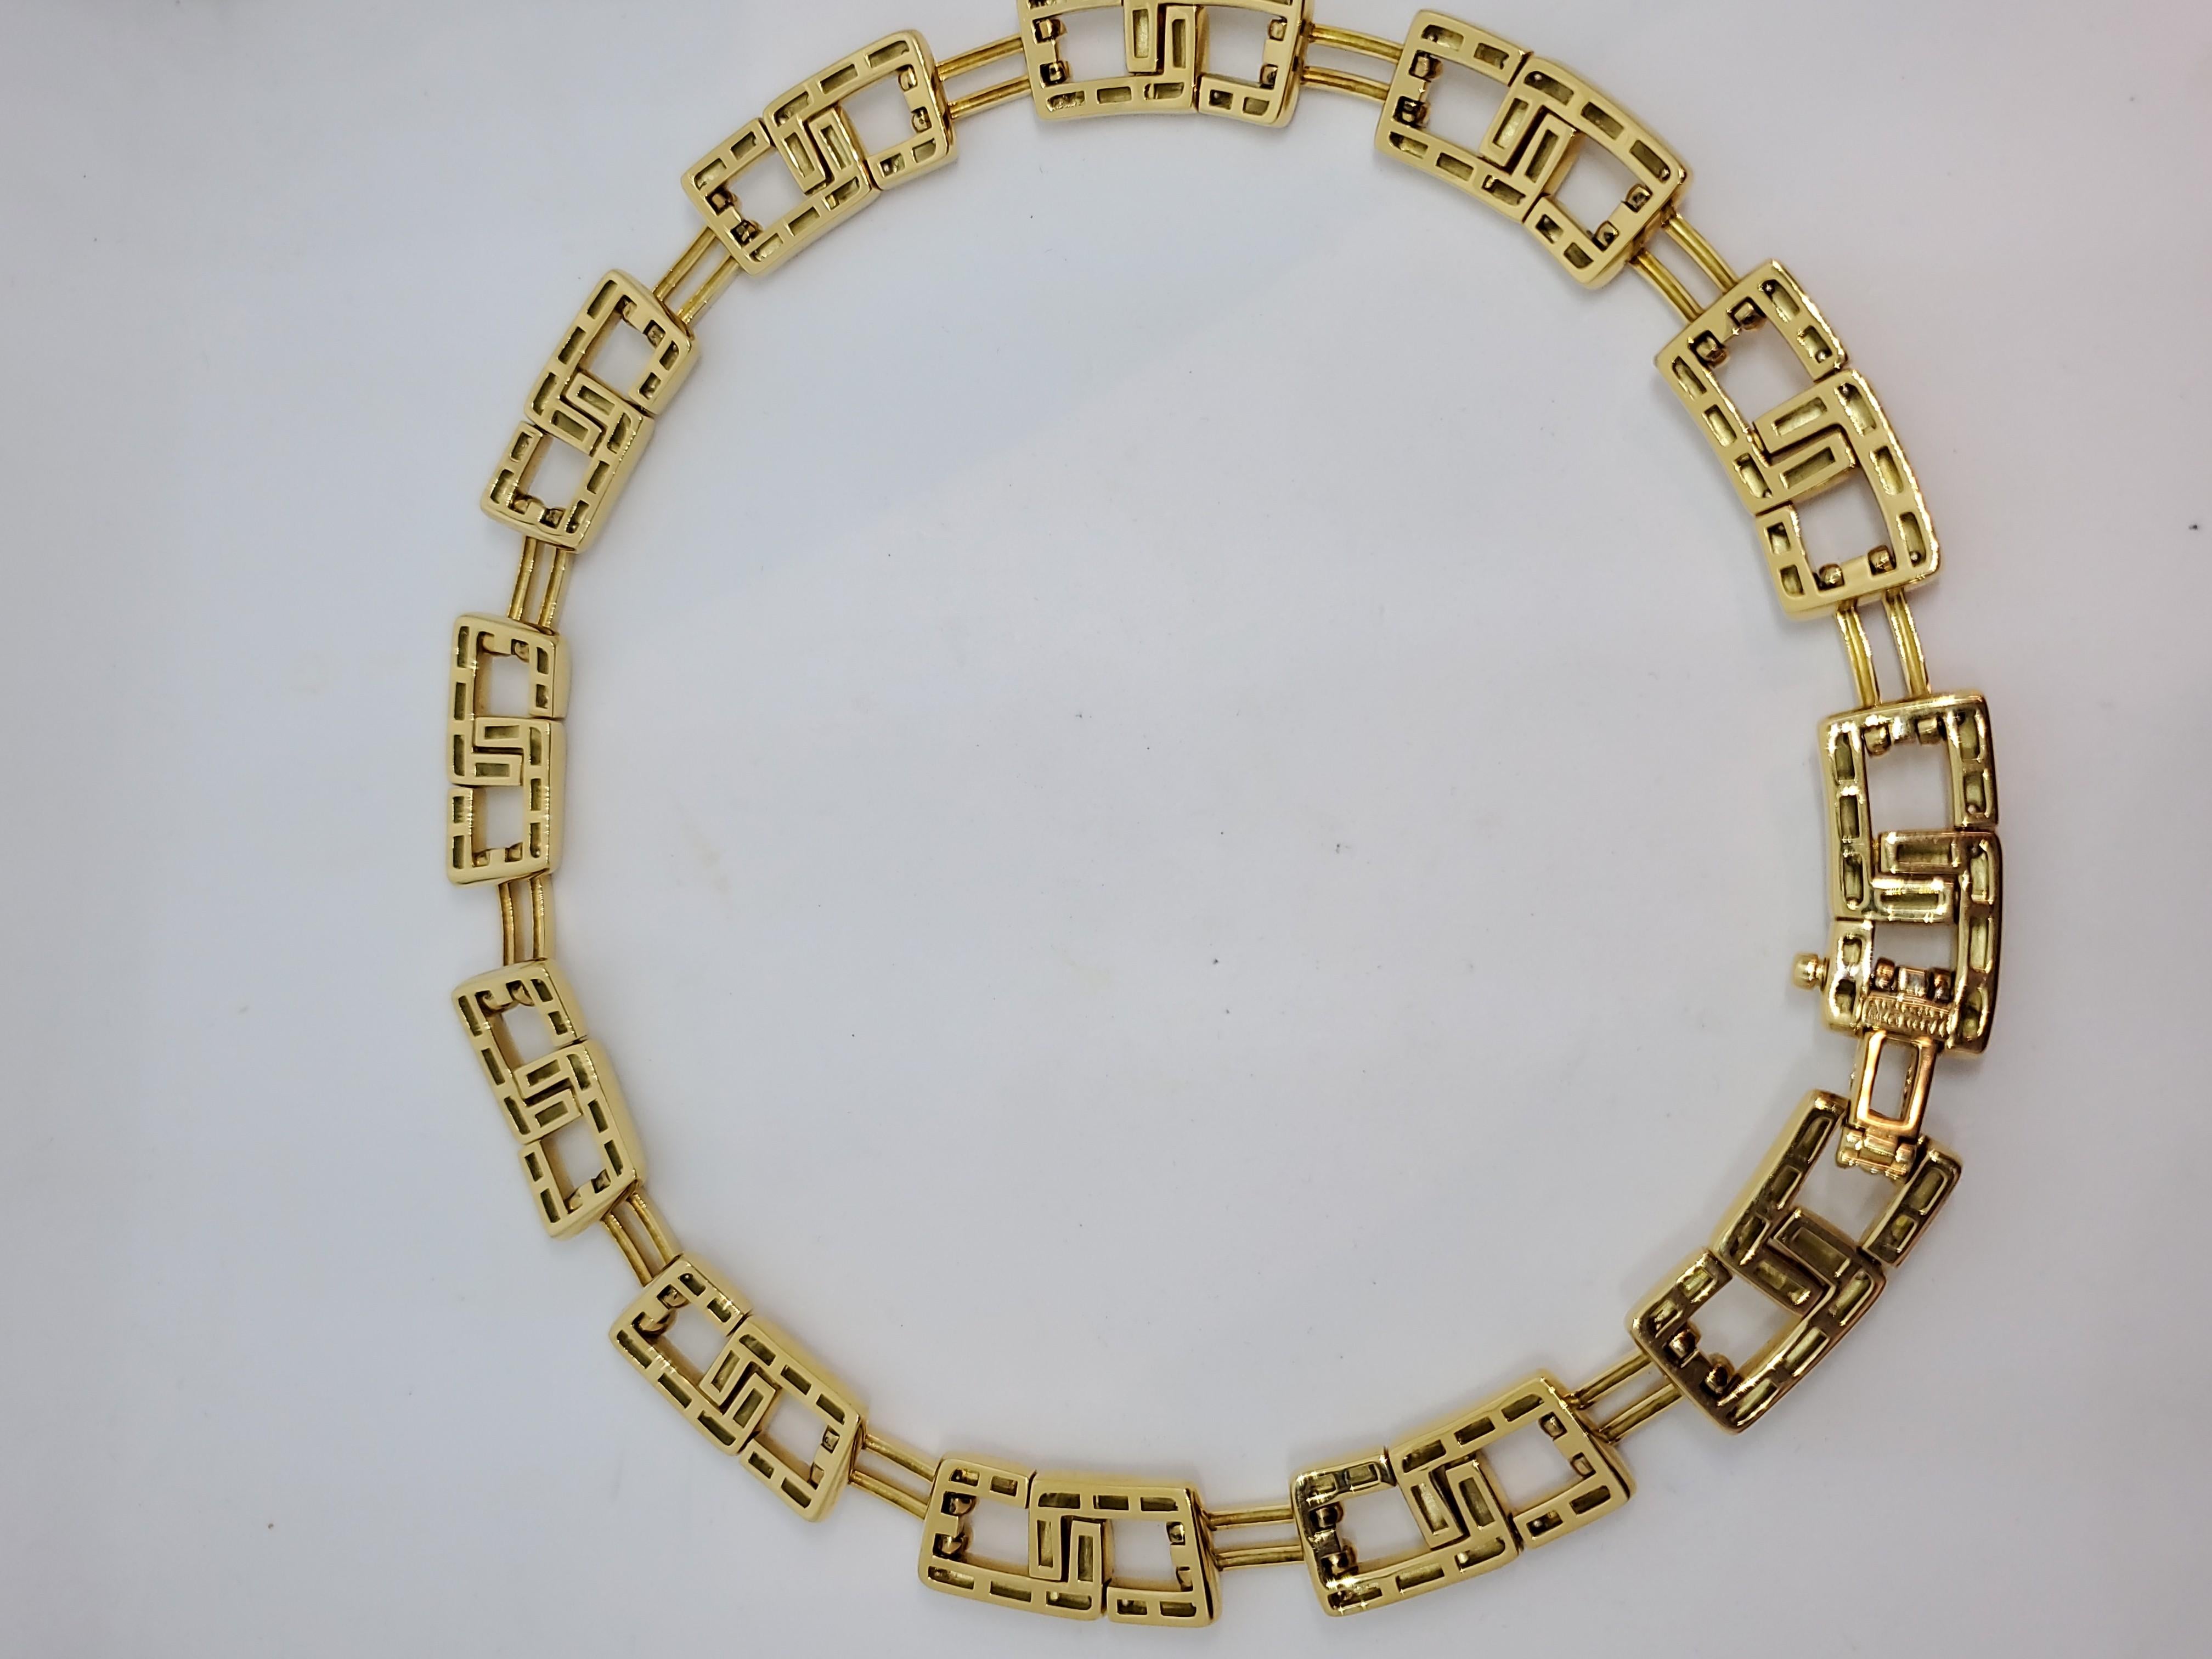 Fantastic Tiffany & Company collar necklace made in 18kt yellow gold. This hard necklace looks amazing on the neck and bends at each intersection of link. Condition is excellent. 

Signed T and Co, Italy, 2001
Total weight 115.1 grams